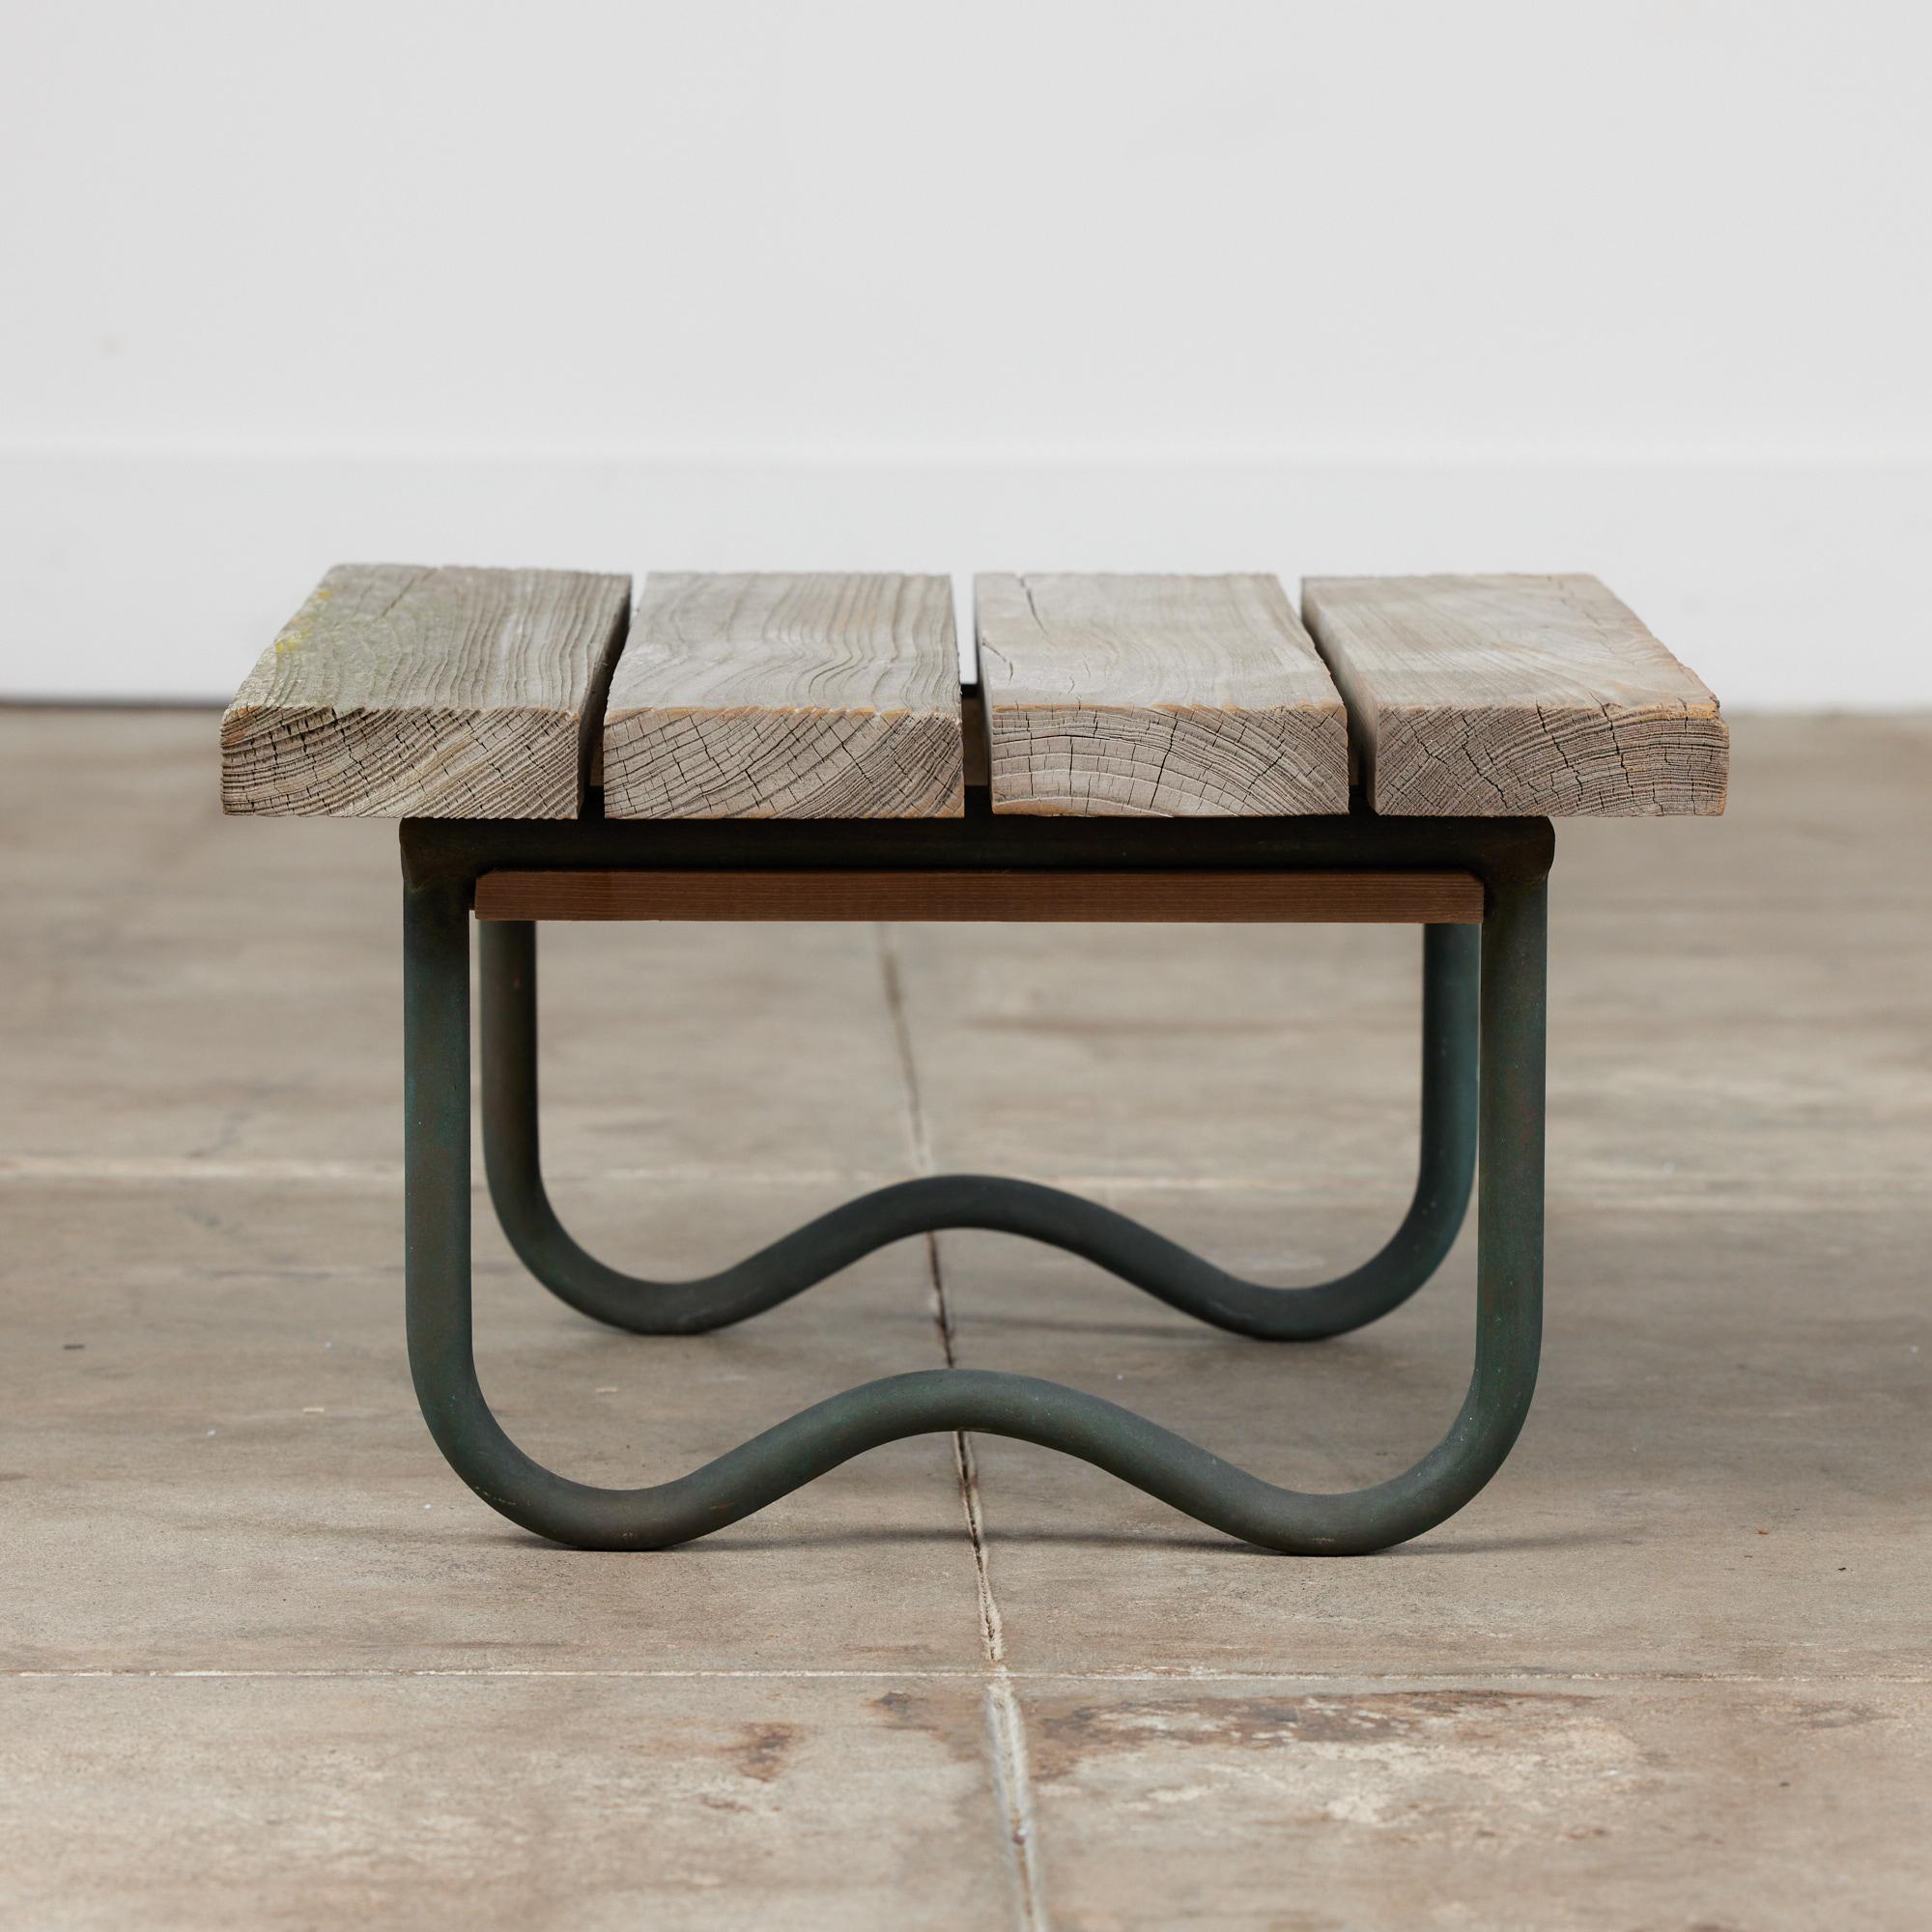 Mid-20th Century Bronze Patio Beach Table with Wood Top by Walter Lamb for Brown Jordan